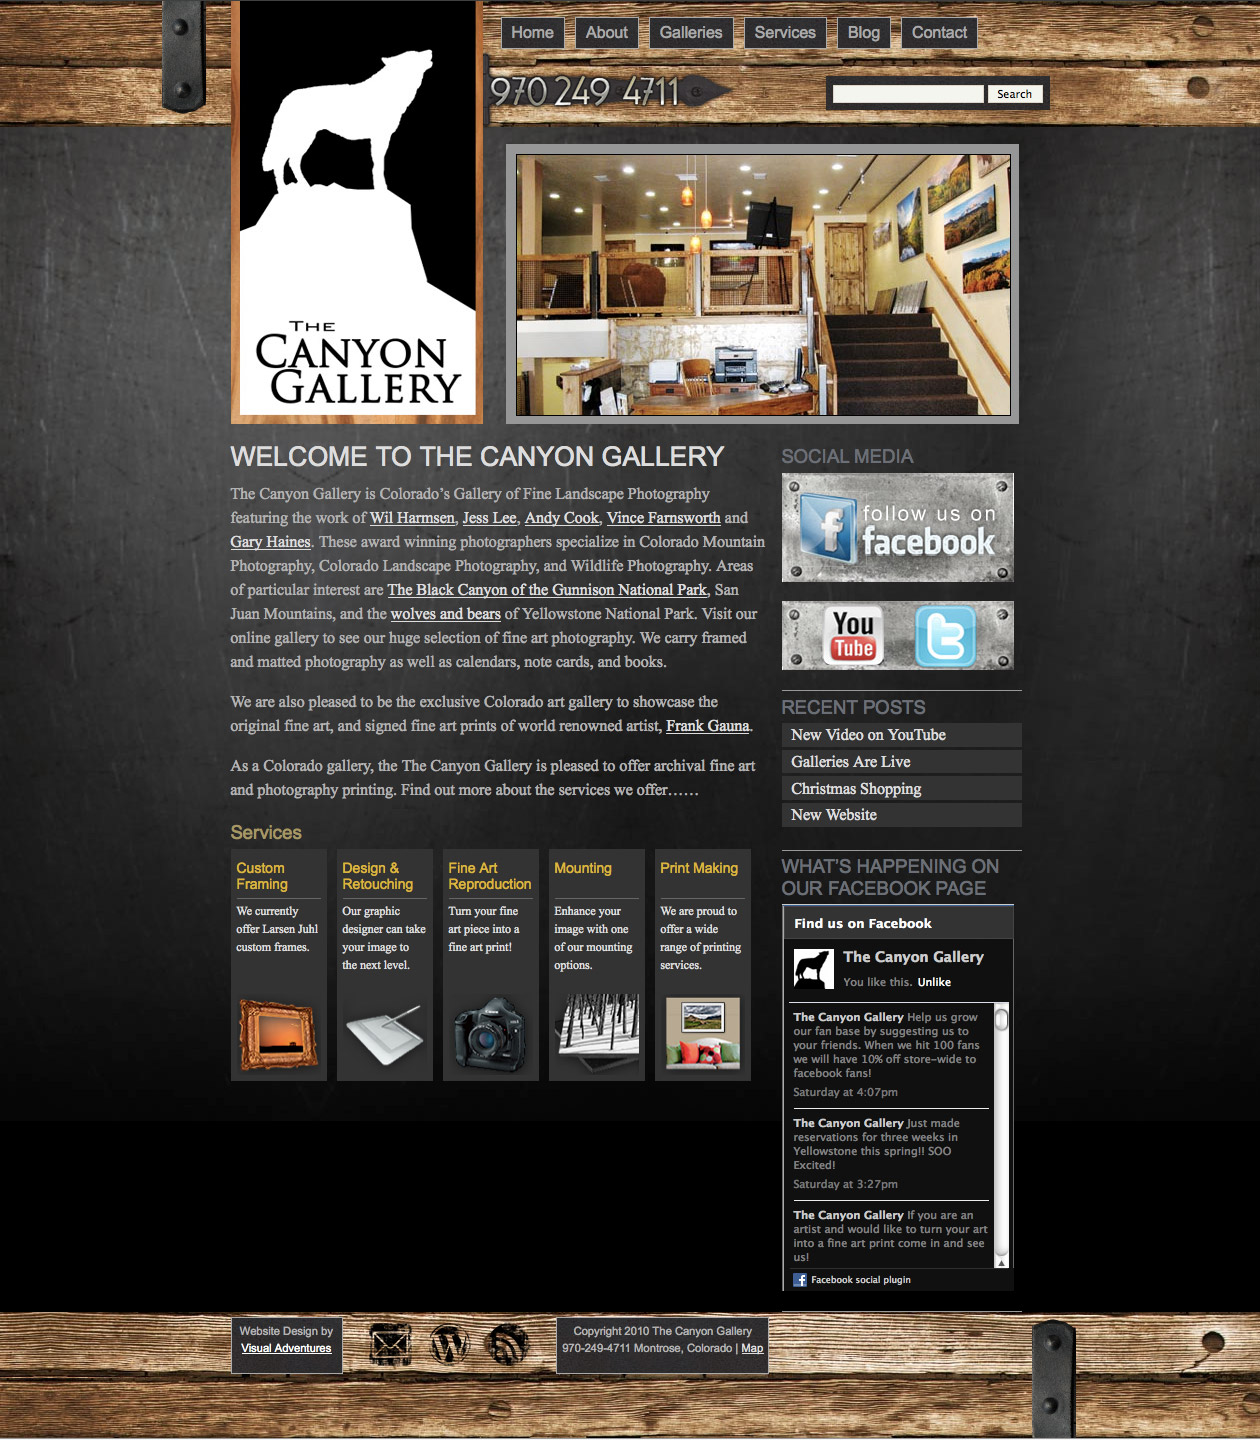 The Canyon Gallery Website Design